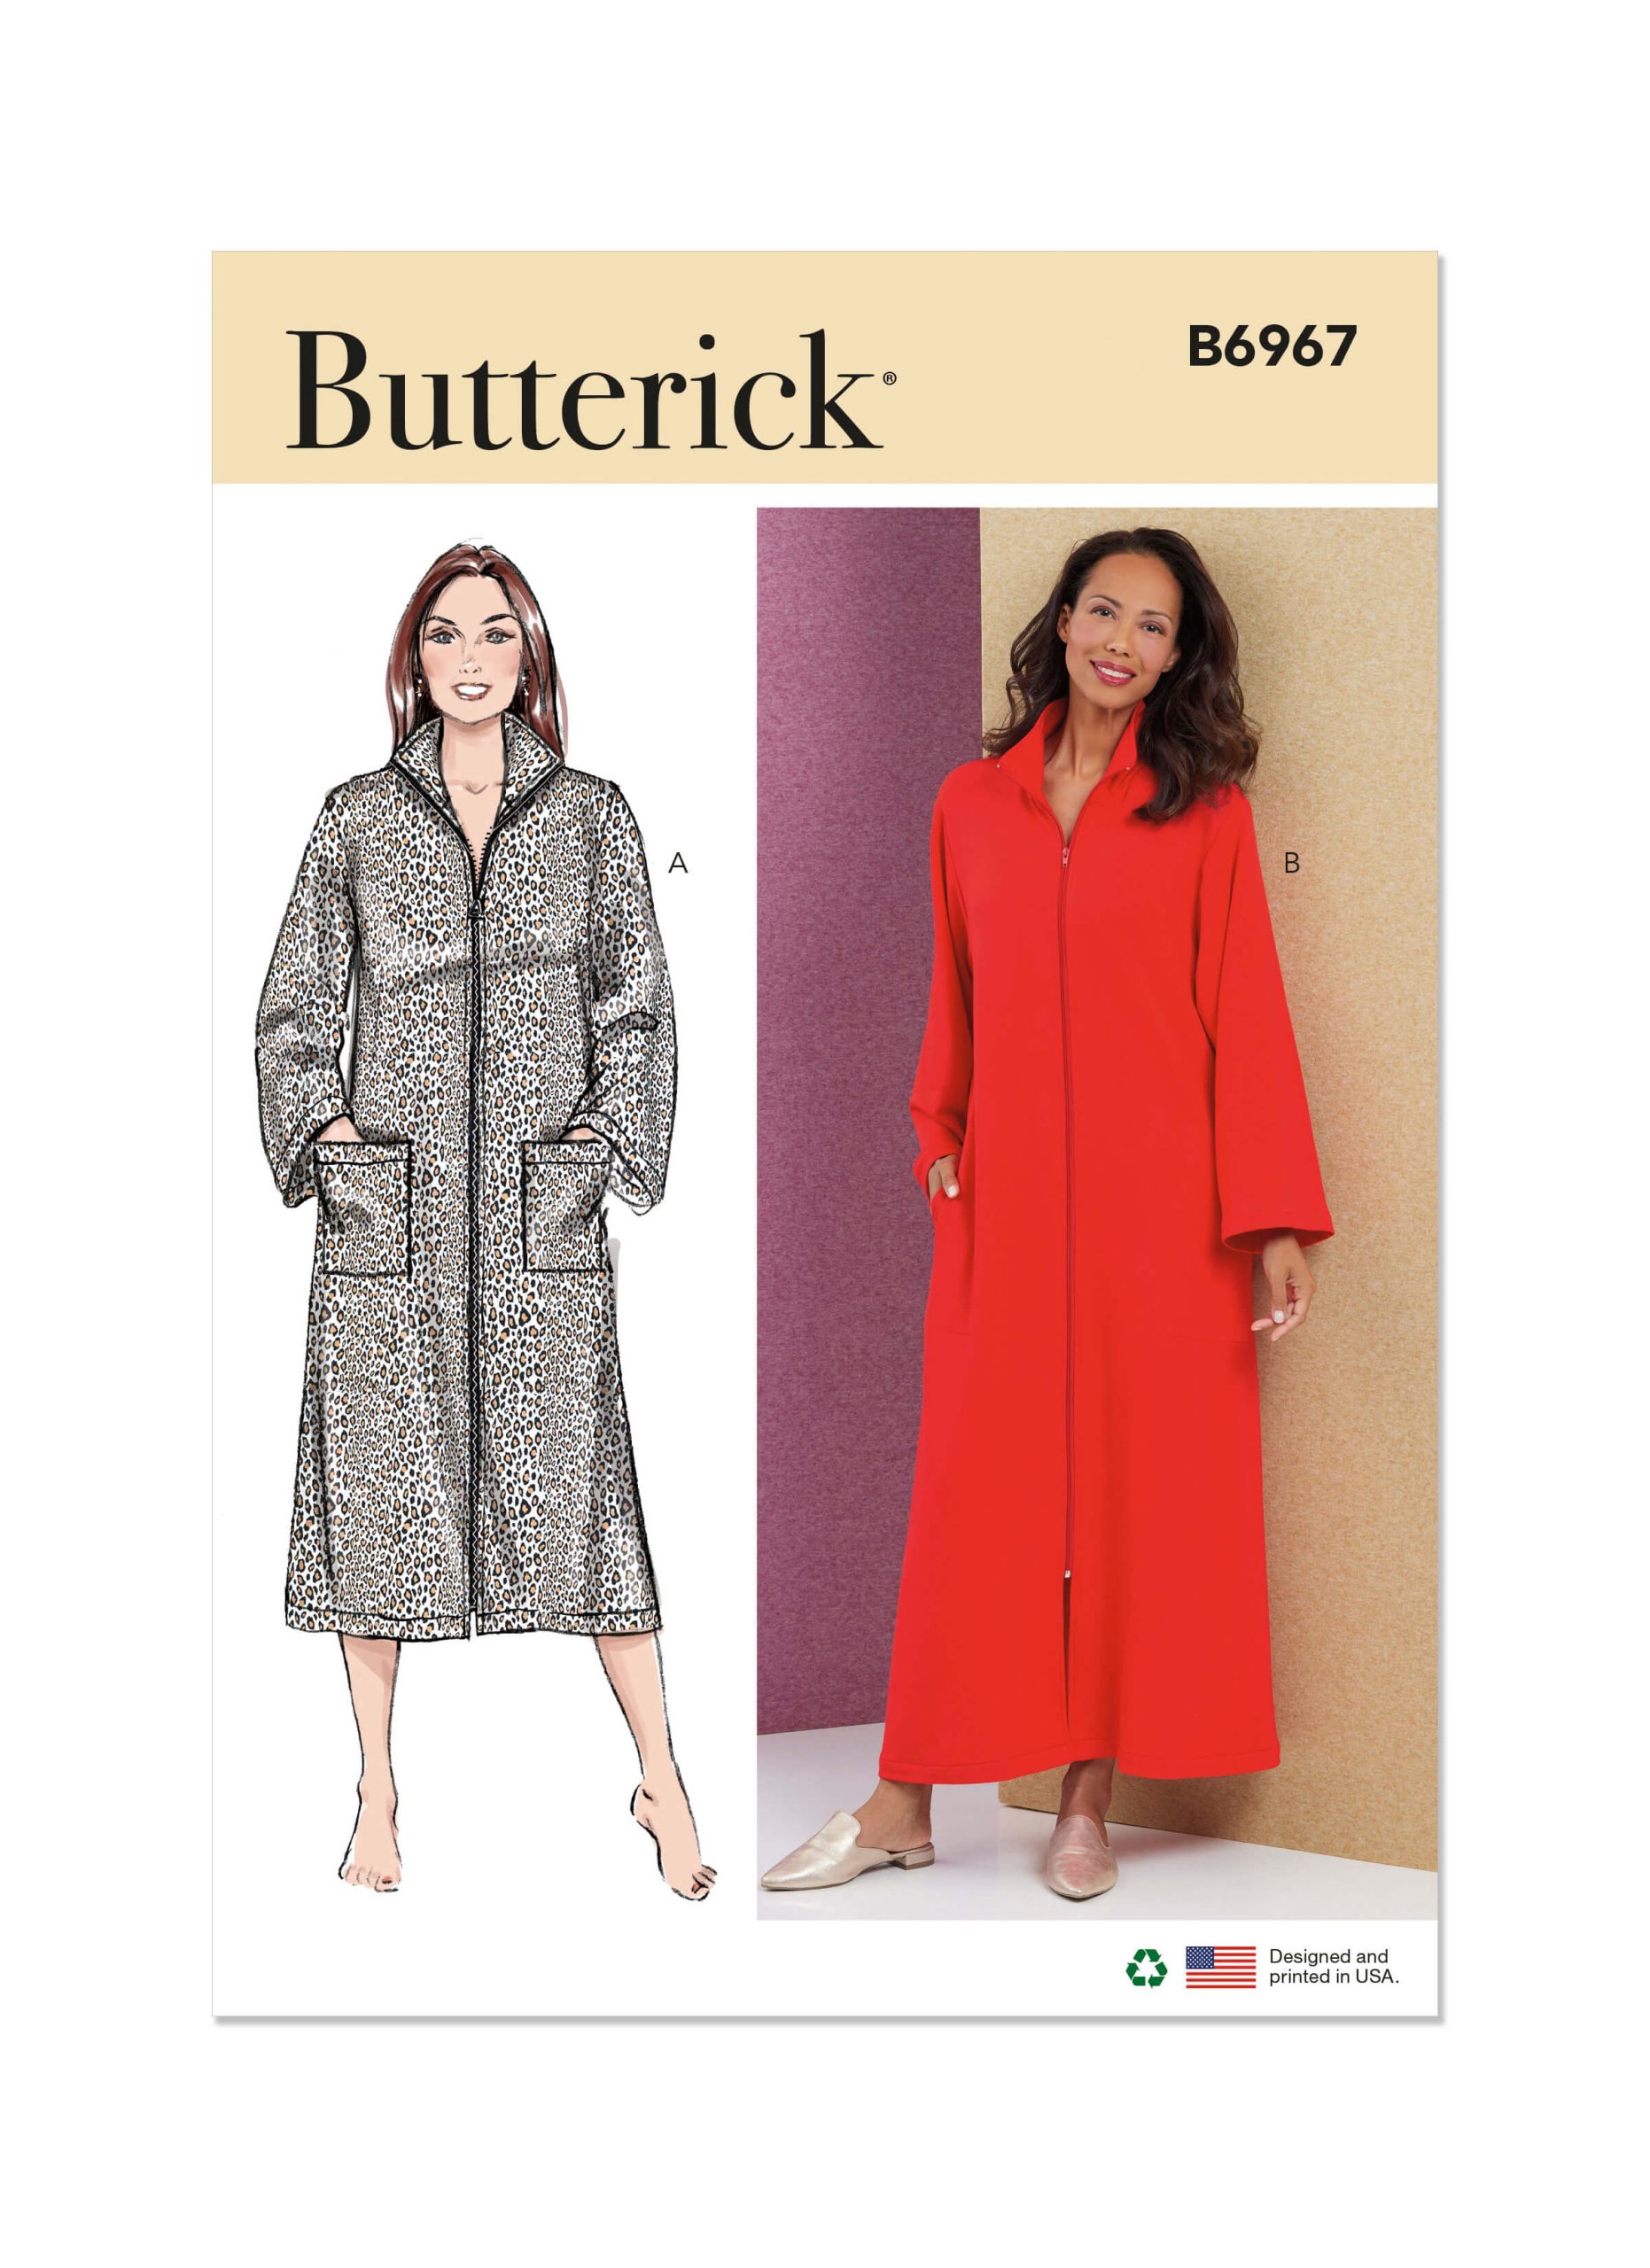 Butterick Sewing Pattern B6967 Misses' and Women's Robe